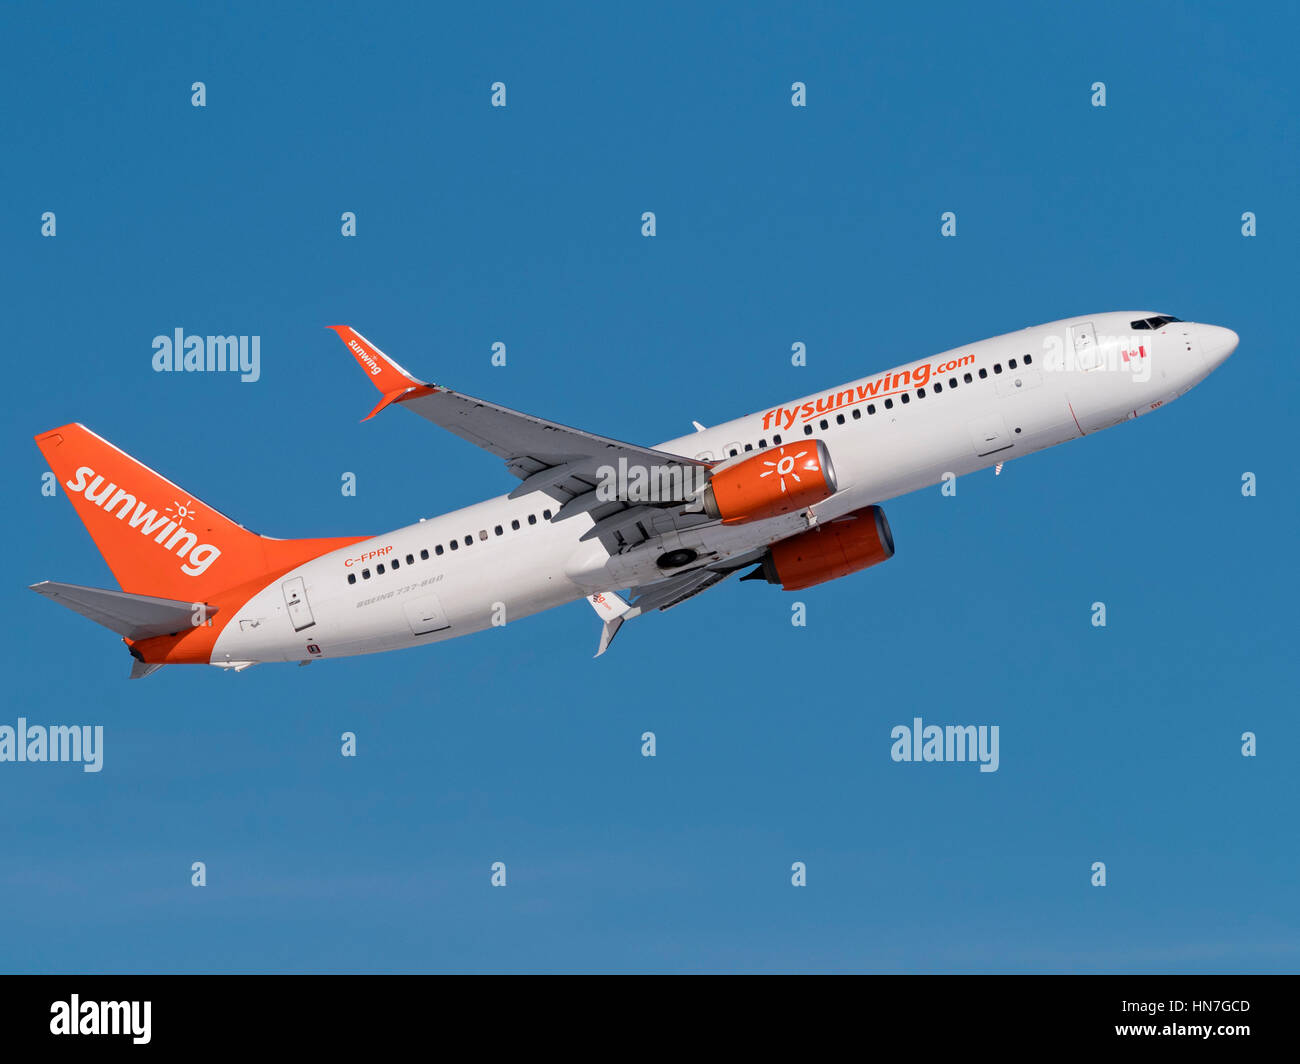 Sunwing Airlines plane airplane Boeing 737 (737-800) narrow-body jet airliner airborne after take off Stock Photo